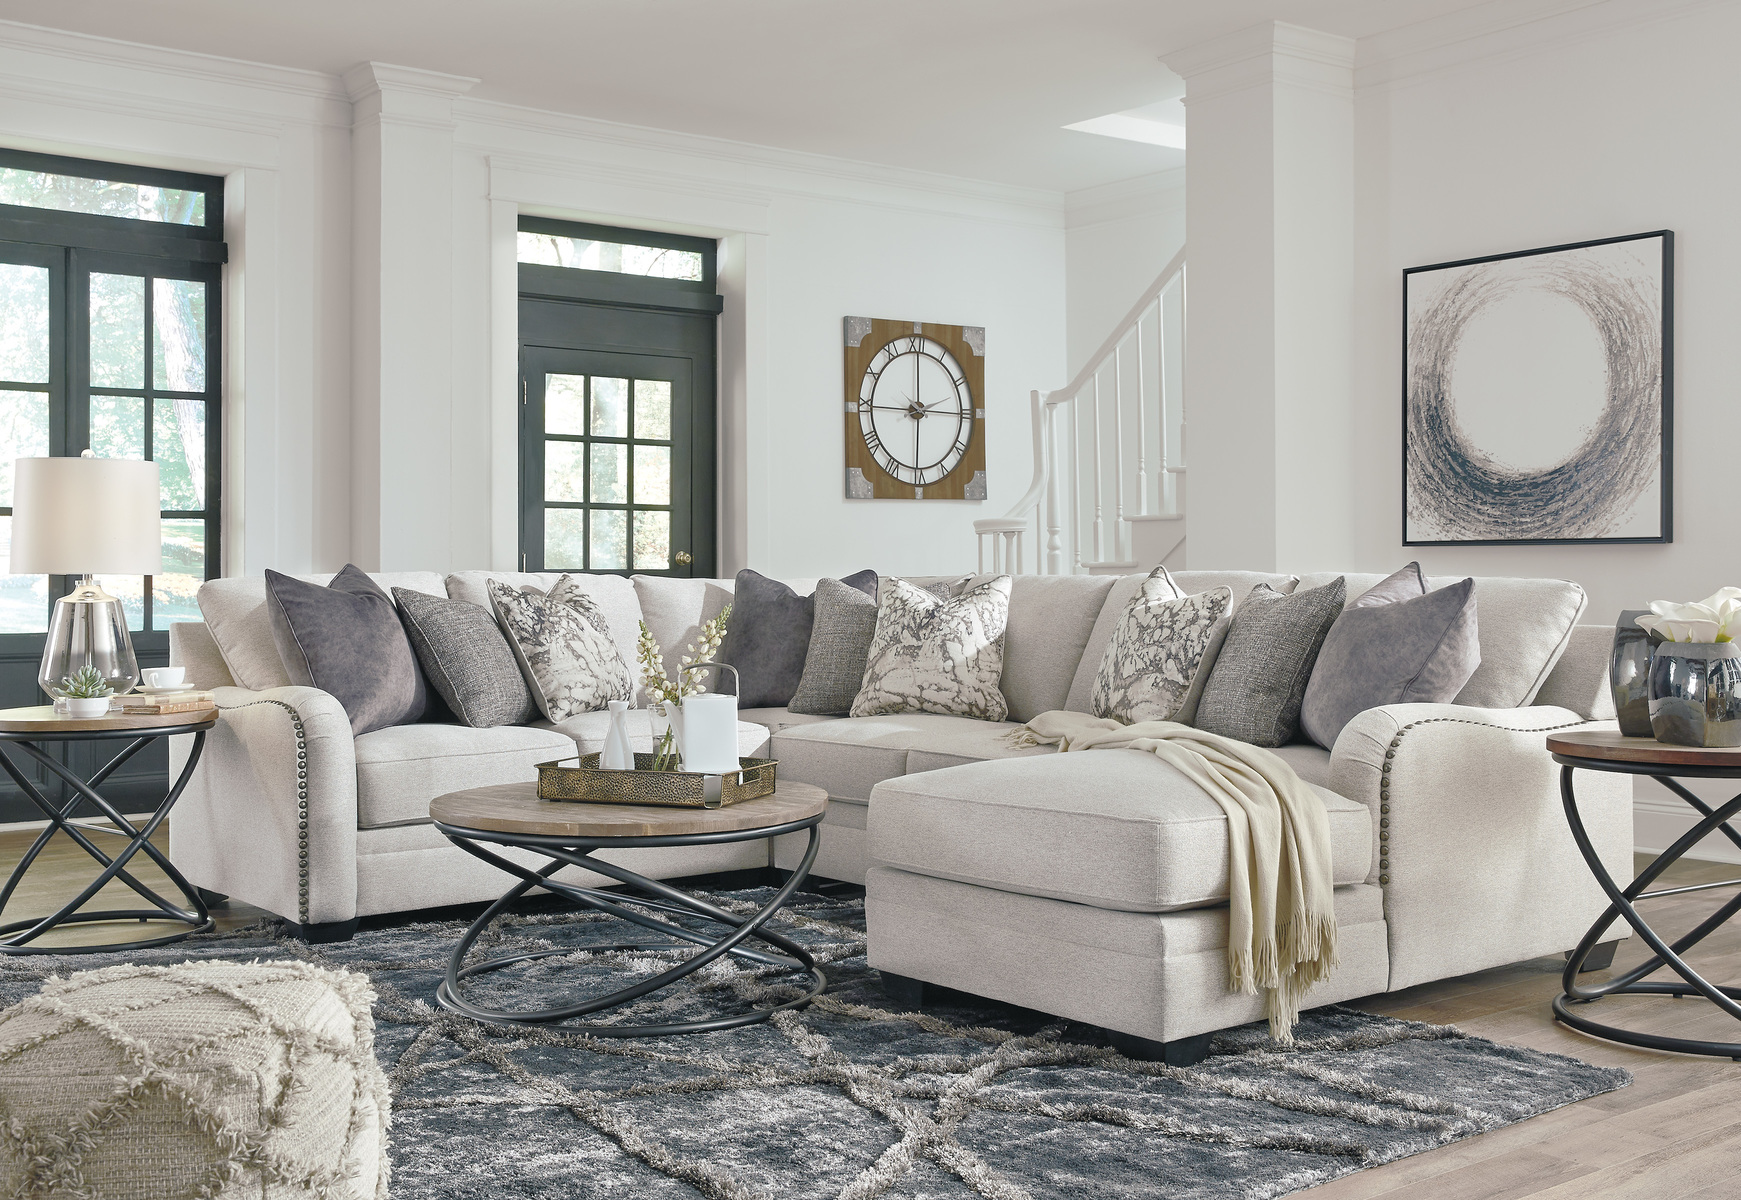 dellara 4 piece living room sectional with chaise | gonzalez